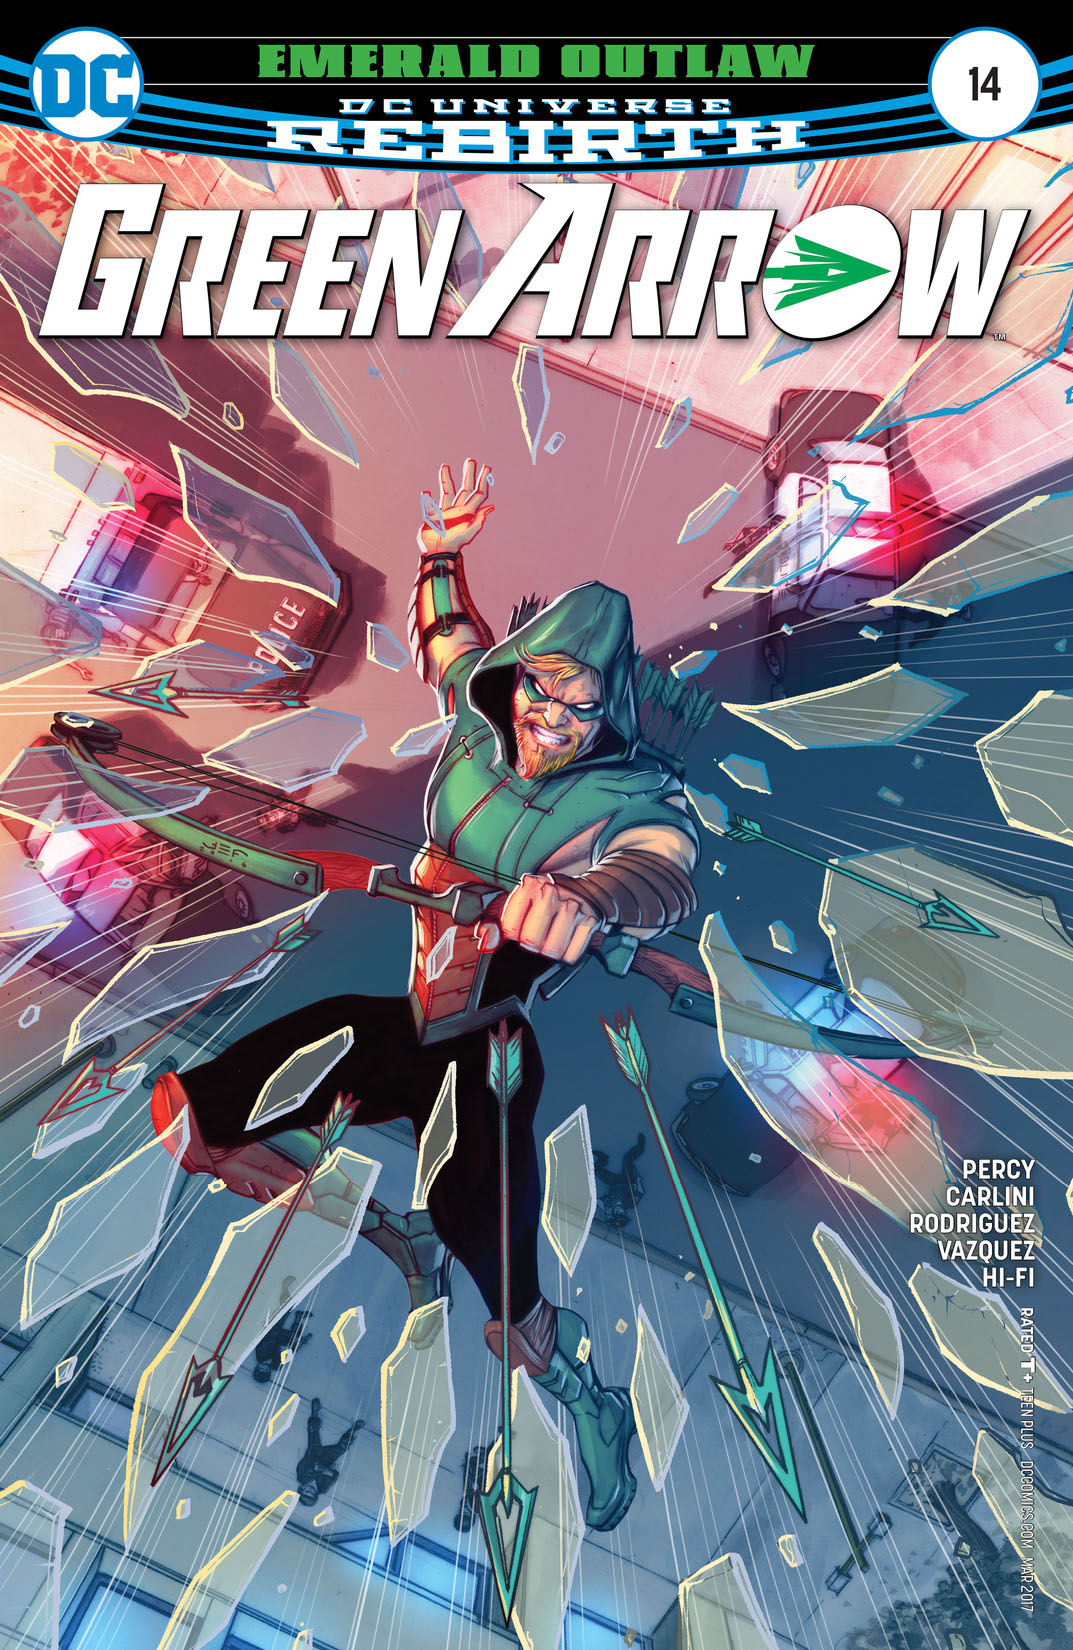 Green Arrow (2016-) #14 preview images